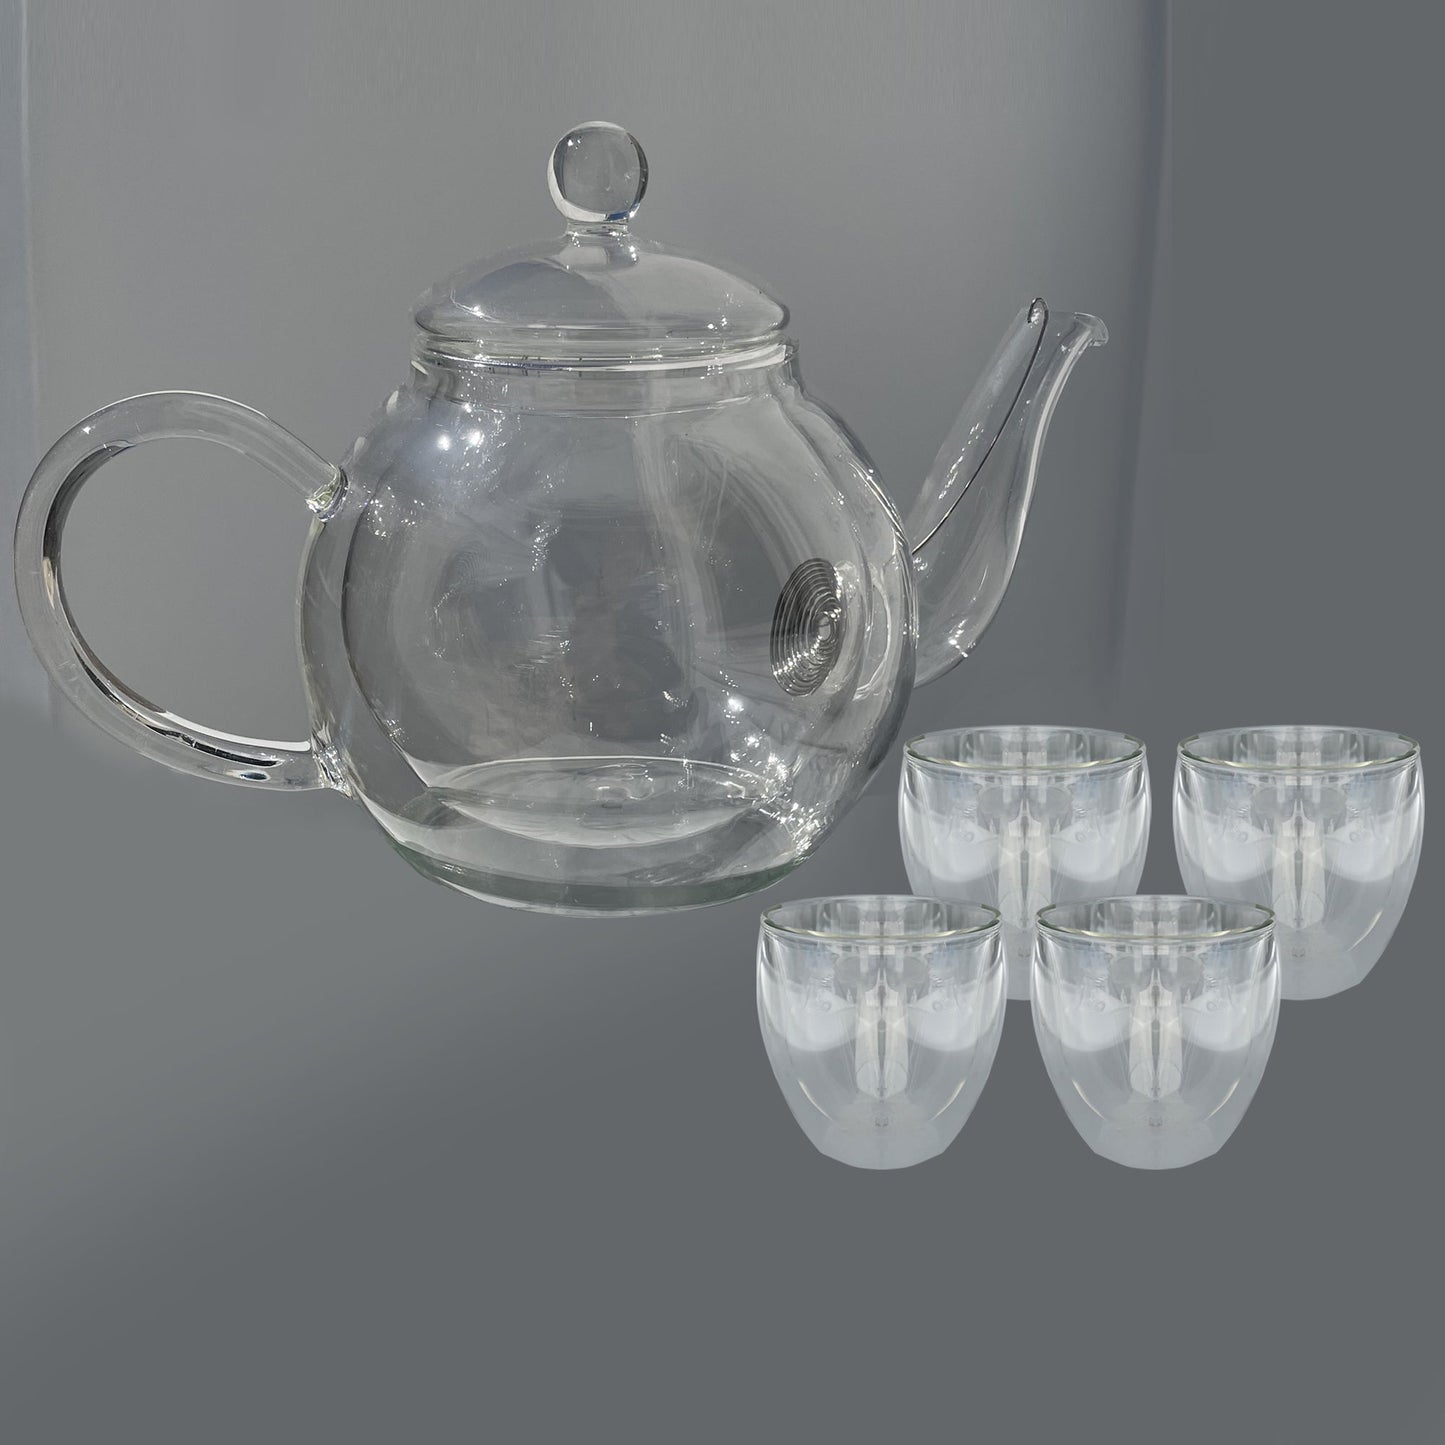 Round Shaped Double Layer Glass Teapot (530 ML), Teapot with Removable Infuser and Lid, Heatproof Safe side handle with Cups